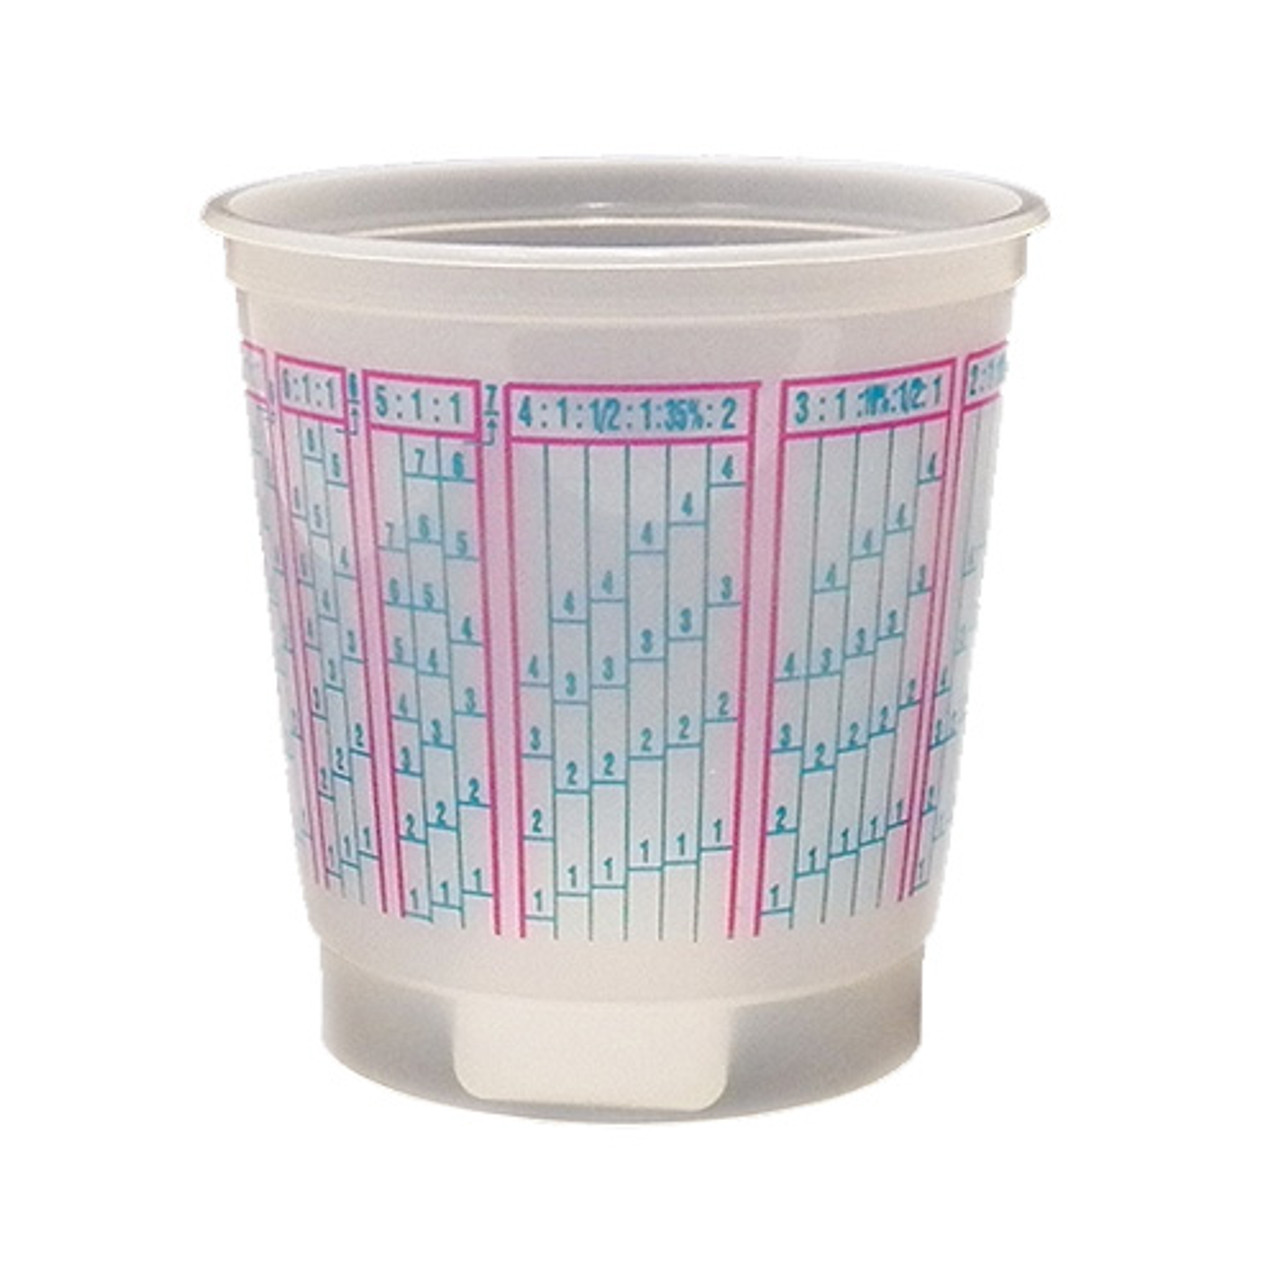 E Z Mix 70008 - 1/2 Pint Plastic Mixing Cups Box of 100